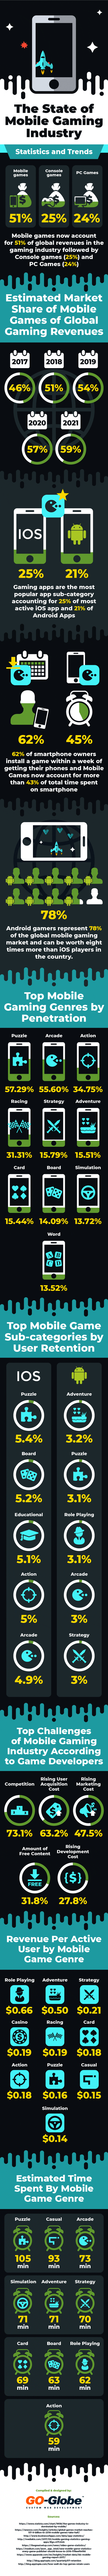 The State of Mobile Gaming Industry [Infographic]